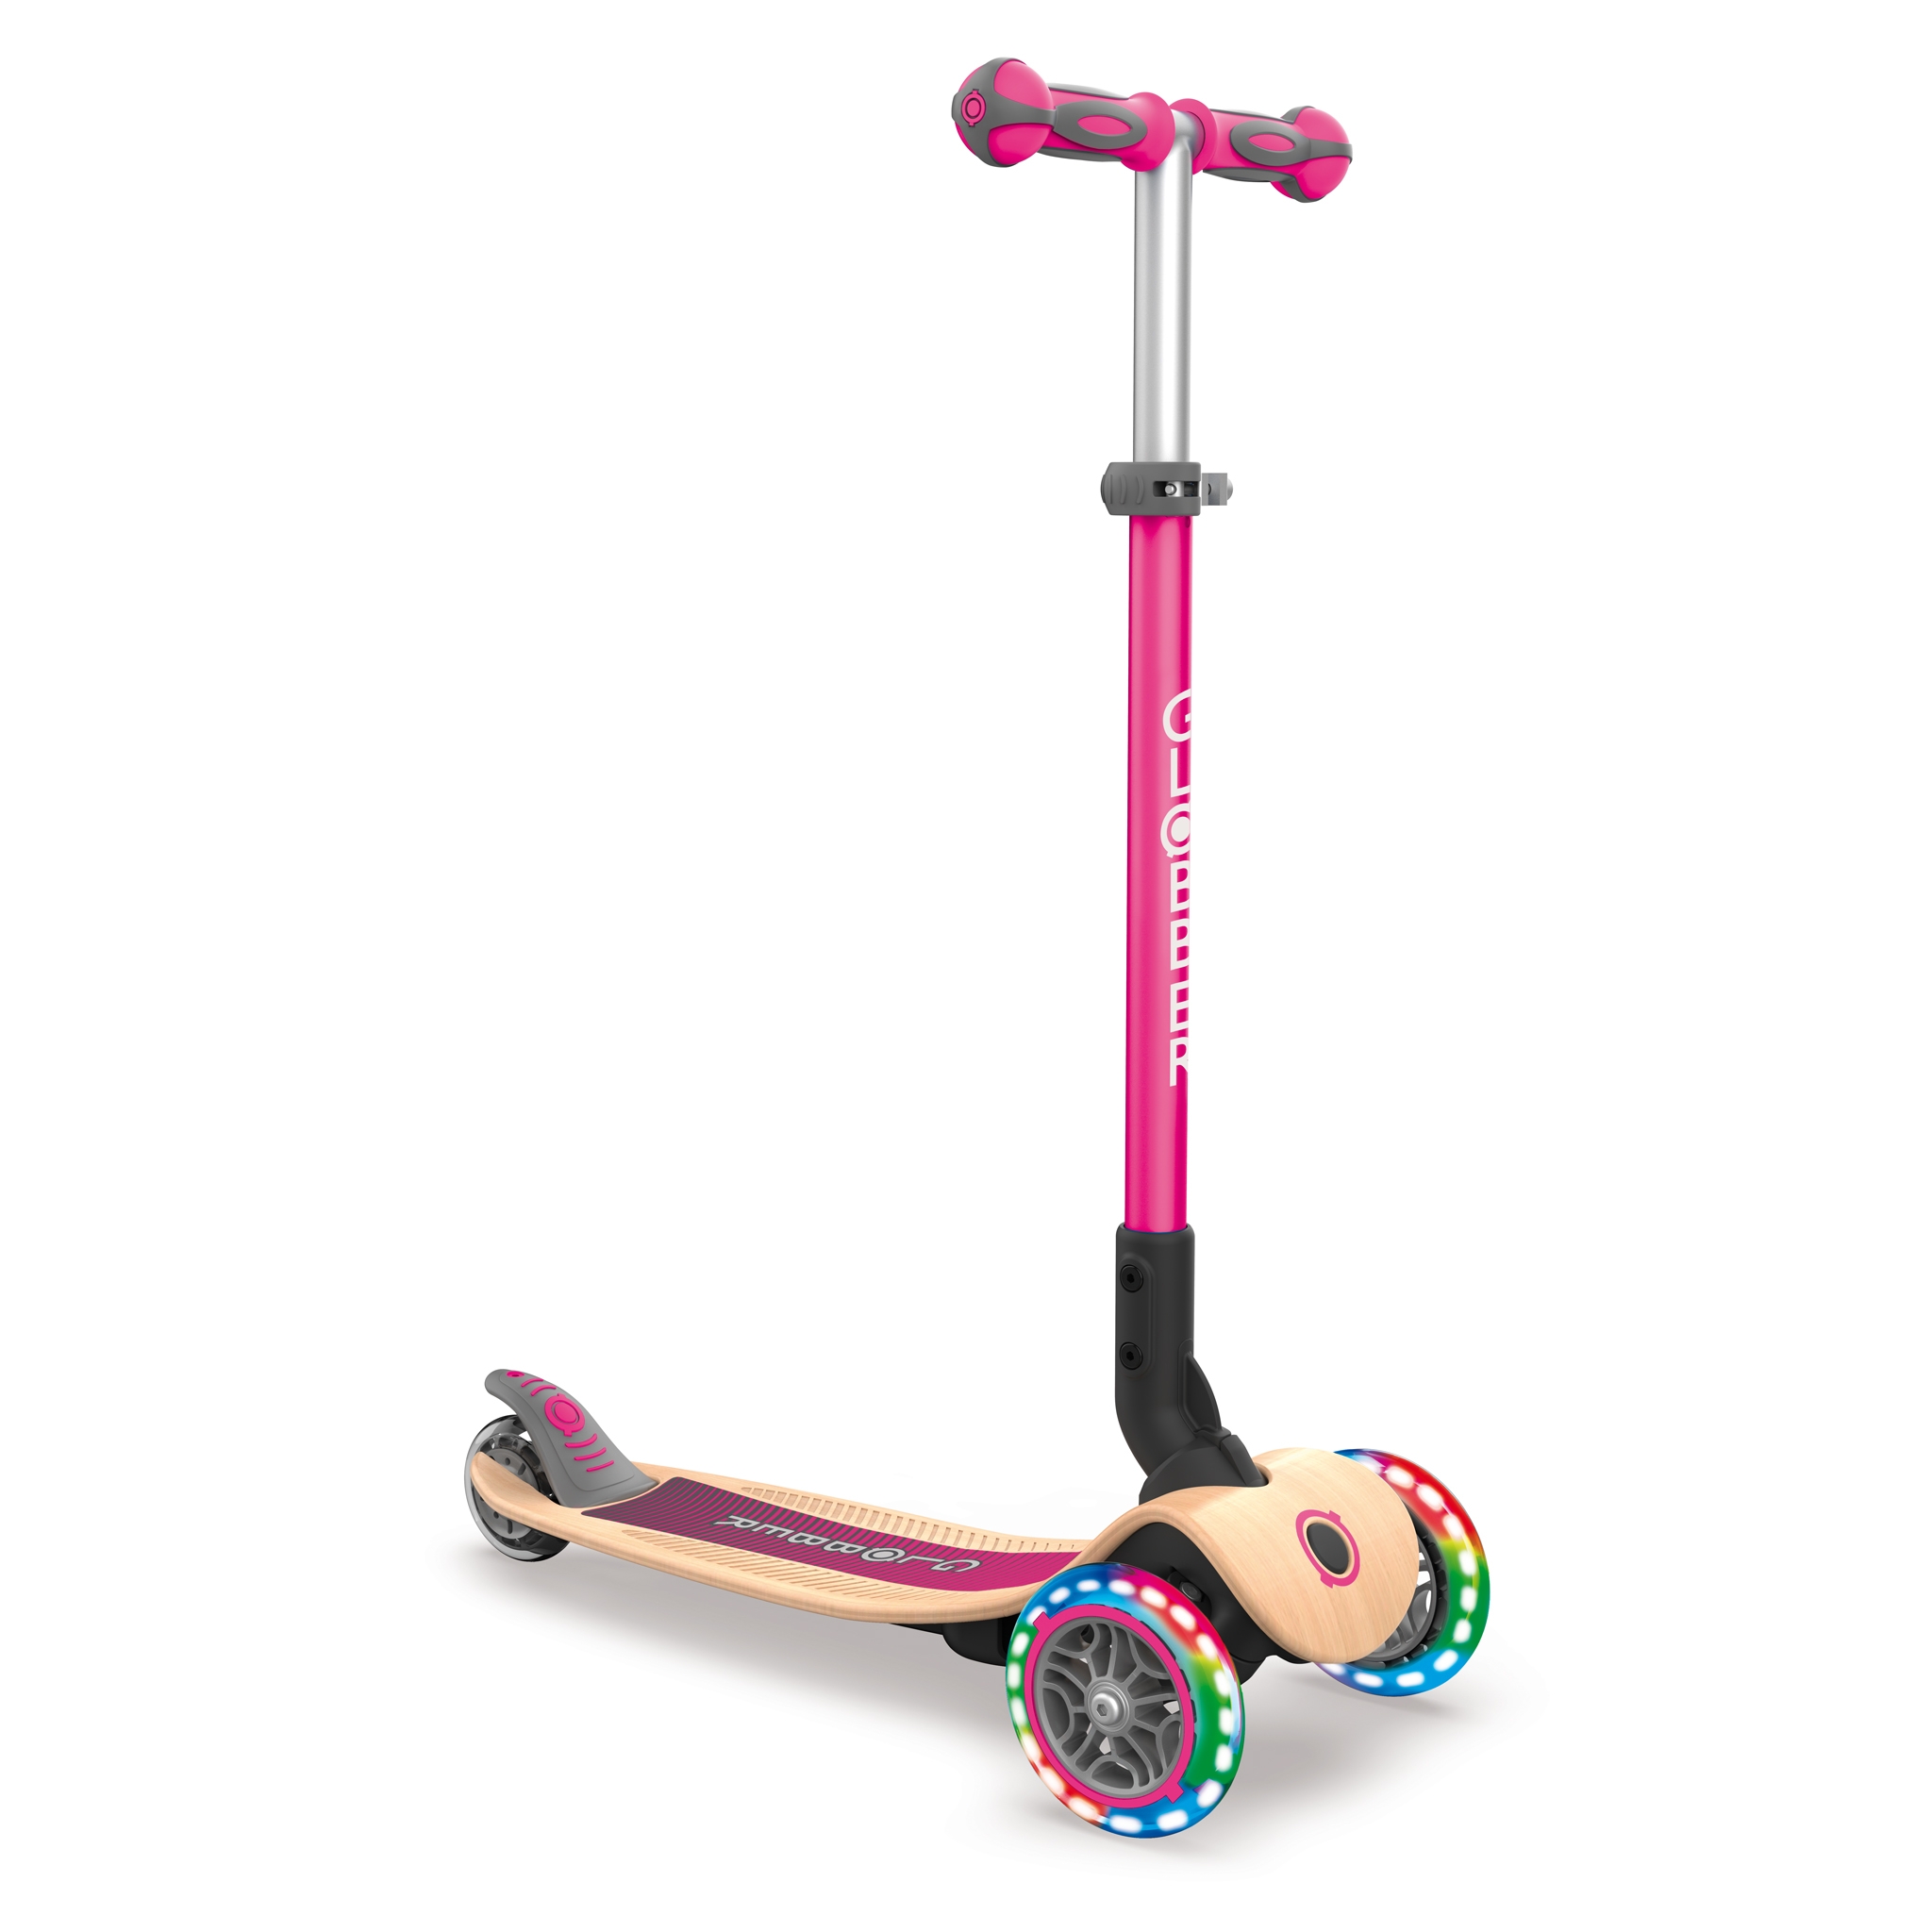 PRIMO-FOLDABLE-WOOD-LIGHTS-3-wheel-foldable-light-up-scooter-with-FSC-certified-7-ply-wooden-scooter-deck_deep-pink 0